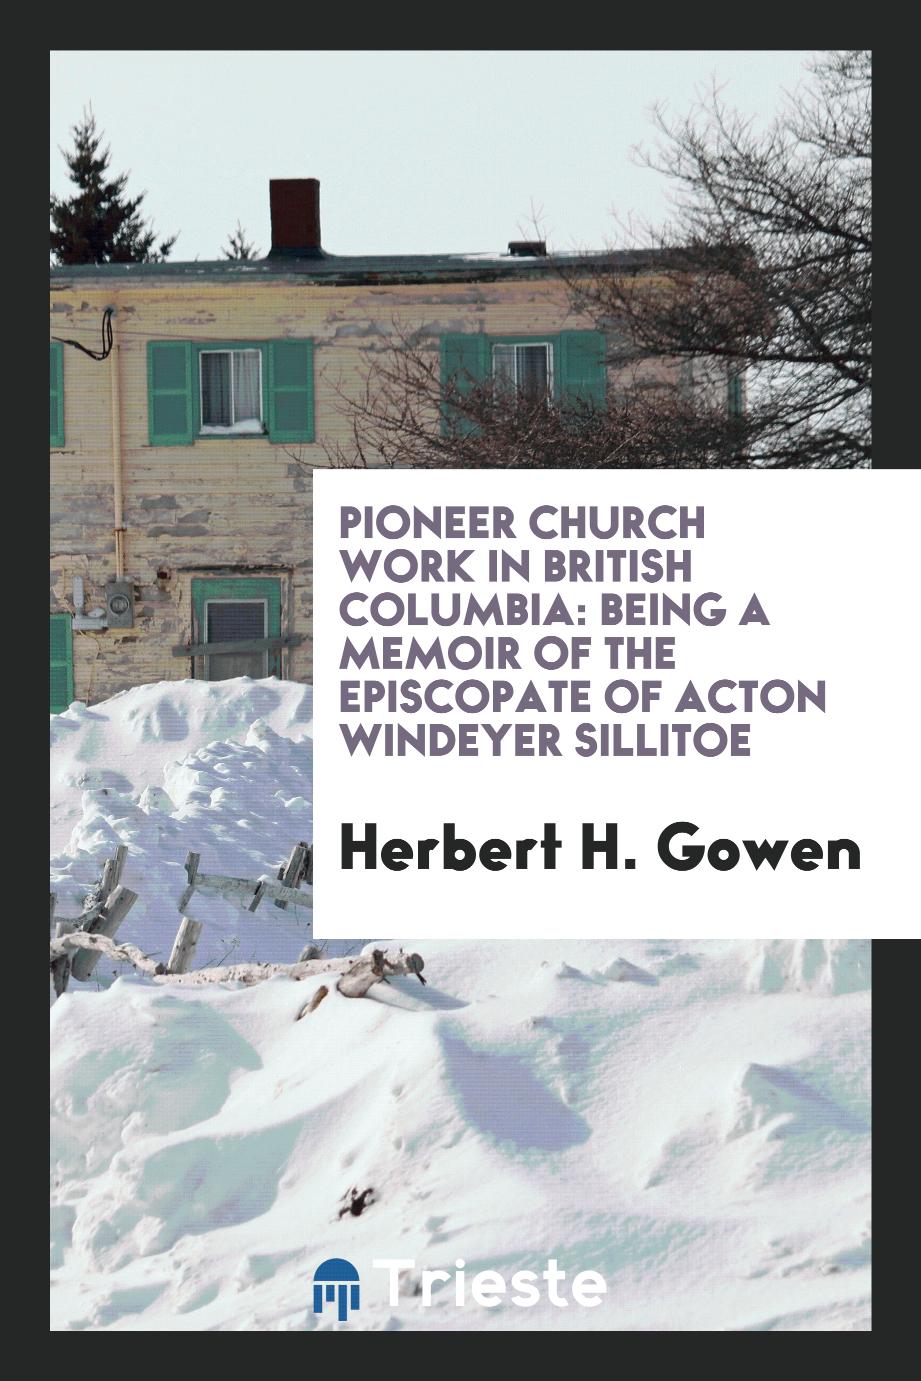 Pioneer Church Work in British Columbia: Being a Memoir of the Episcopate of Acton Windeyer Sillitoe